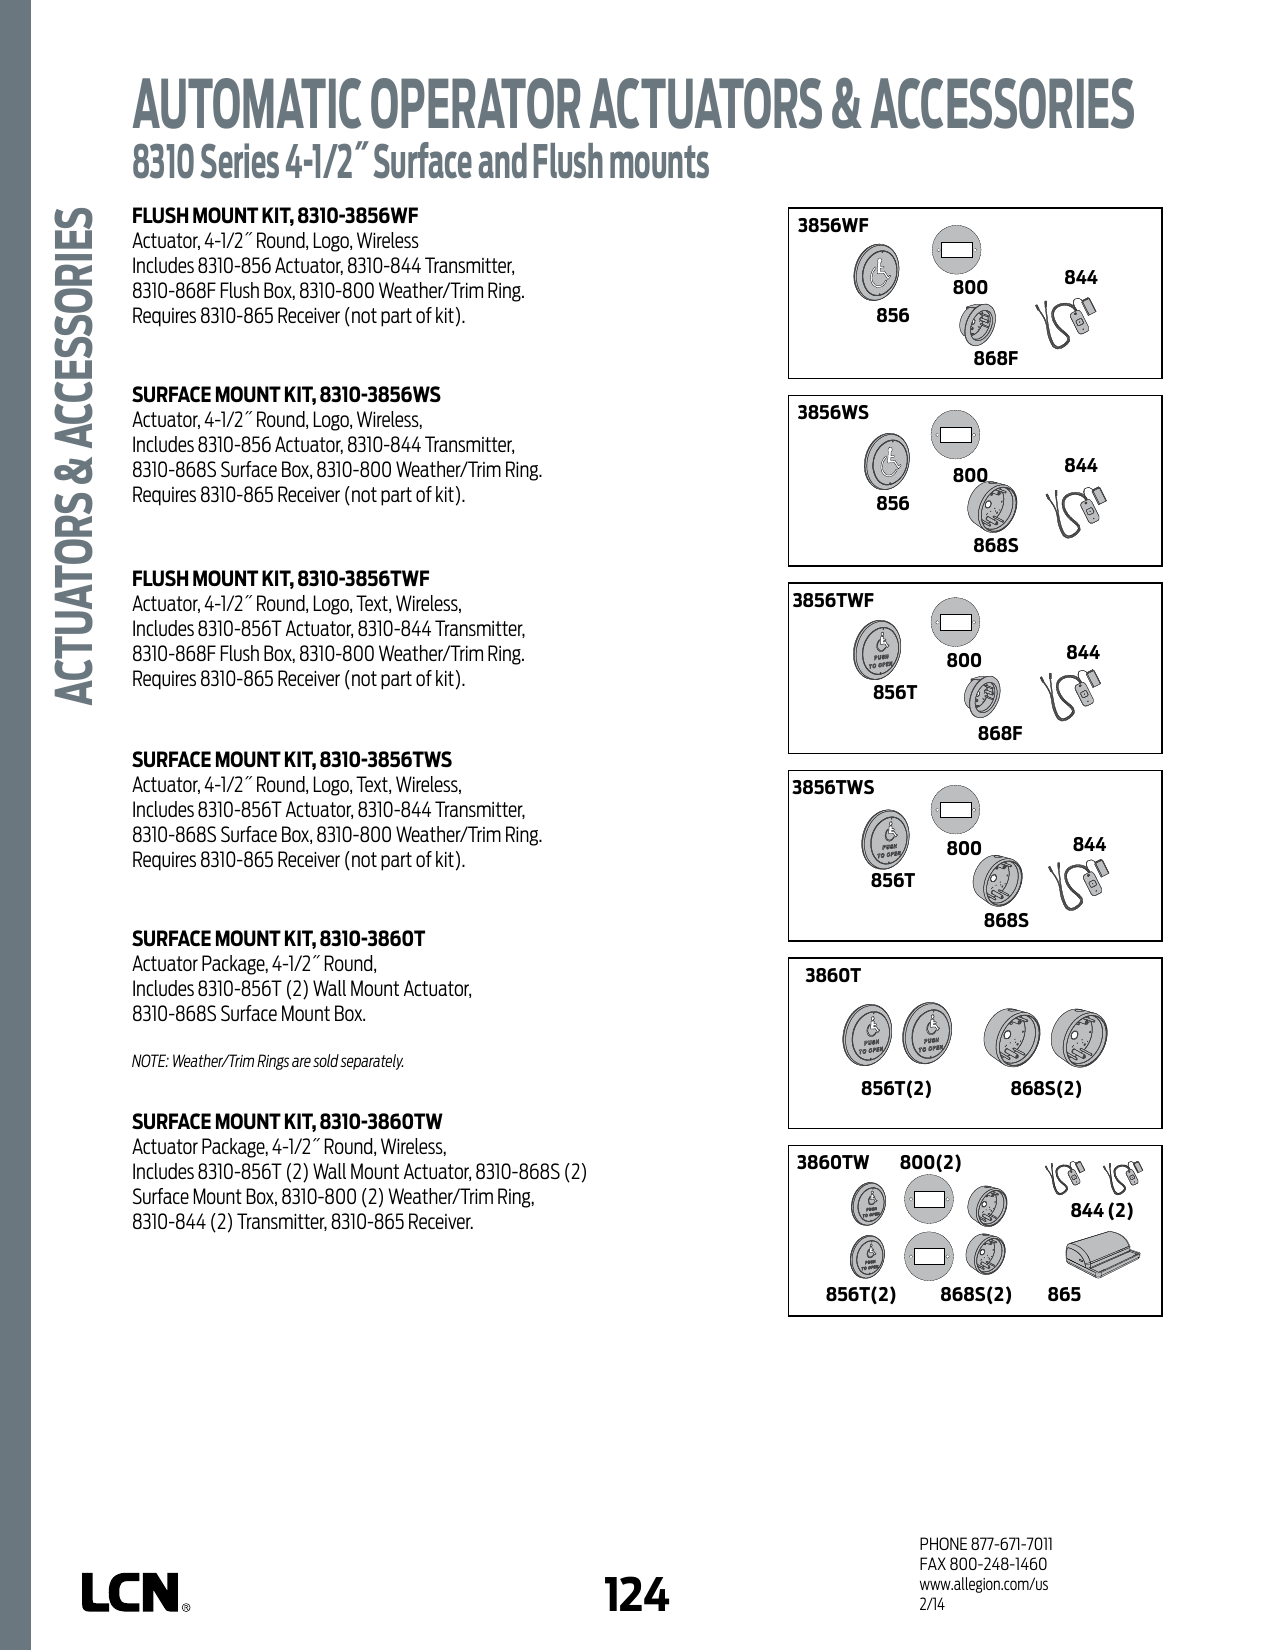 Page 2 of 9 - LCN  8310 Series Automatic Operator Actuators & Accessories Cut Sheet